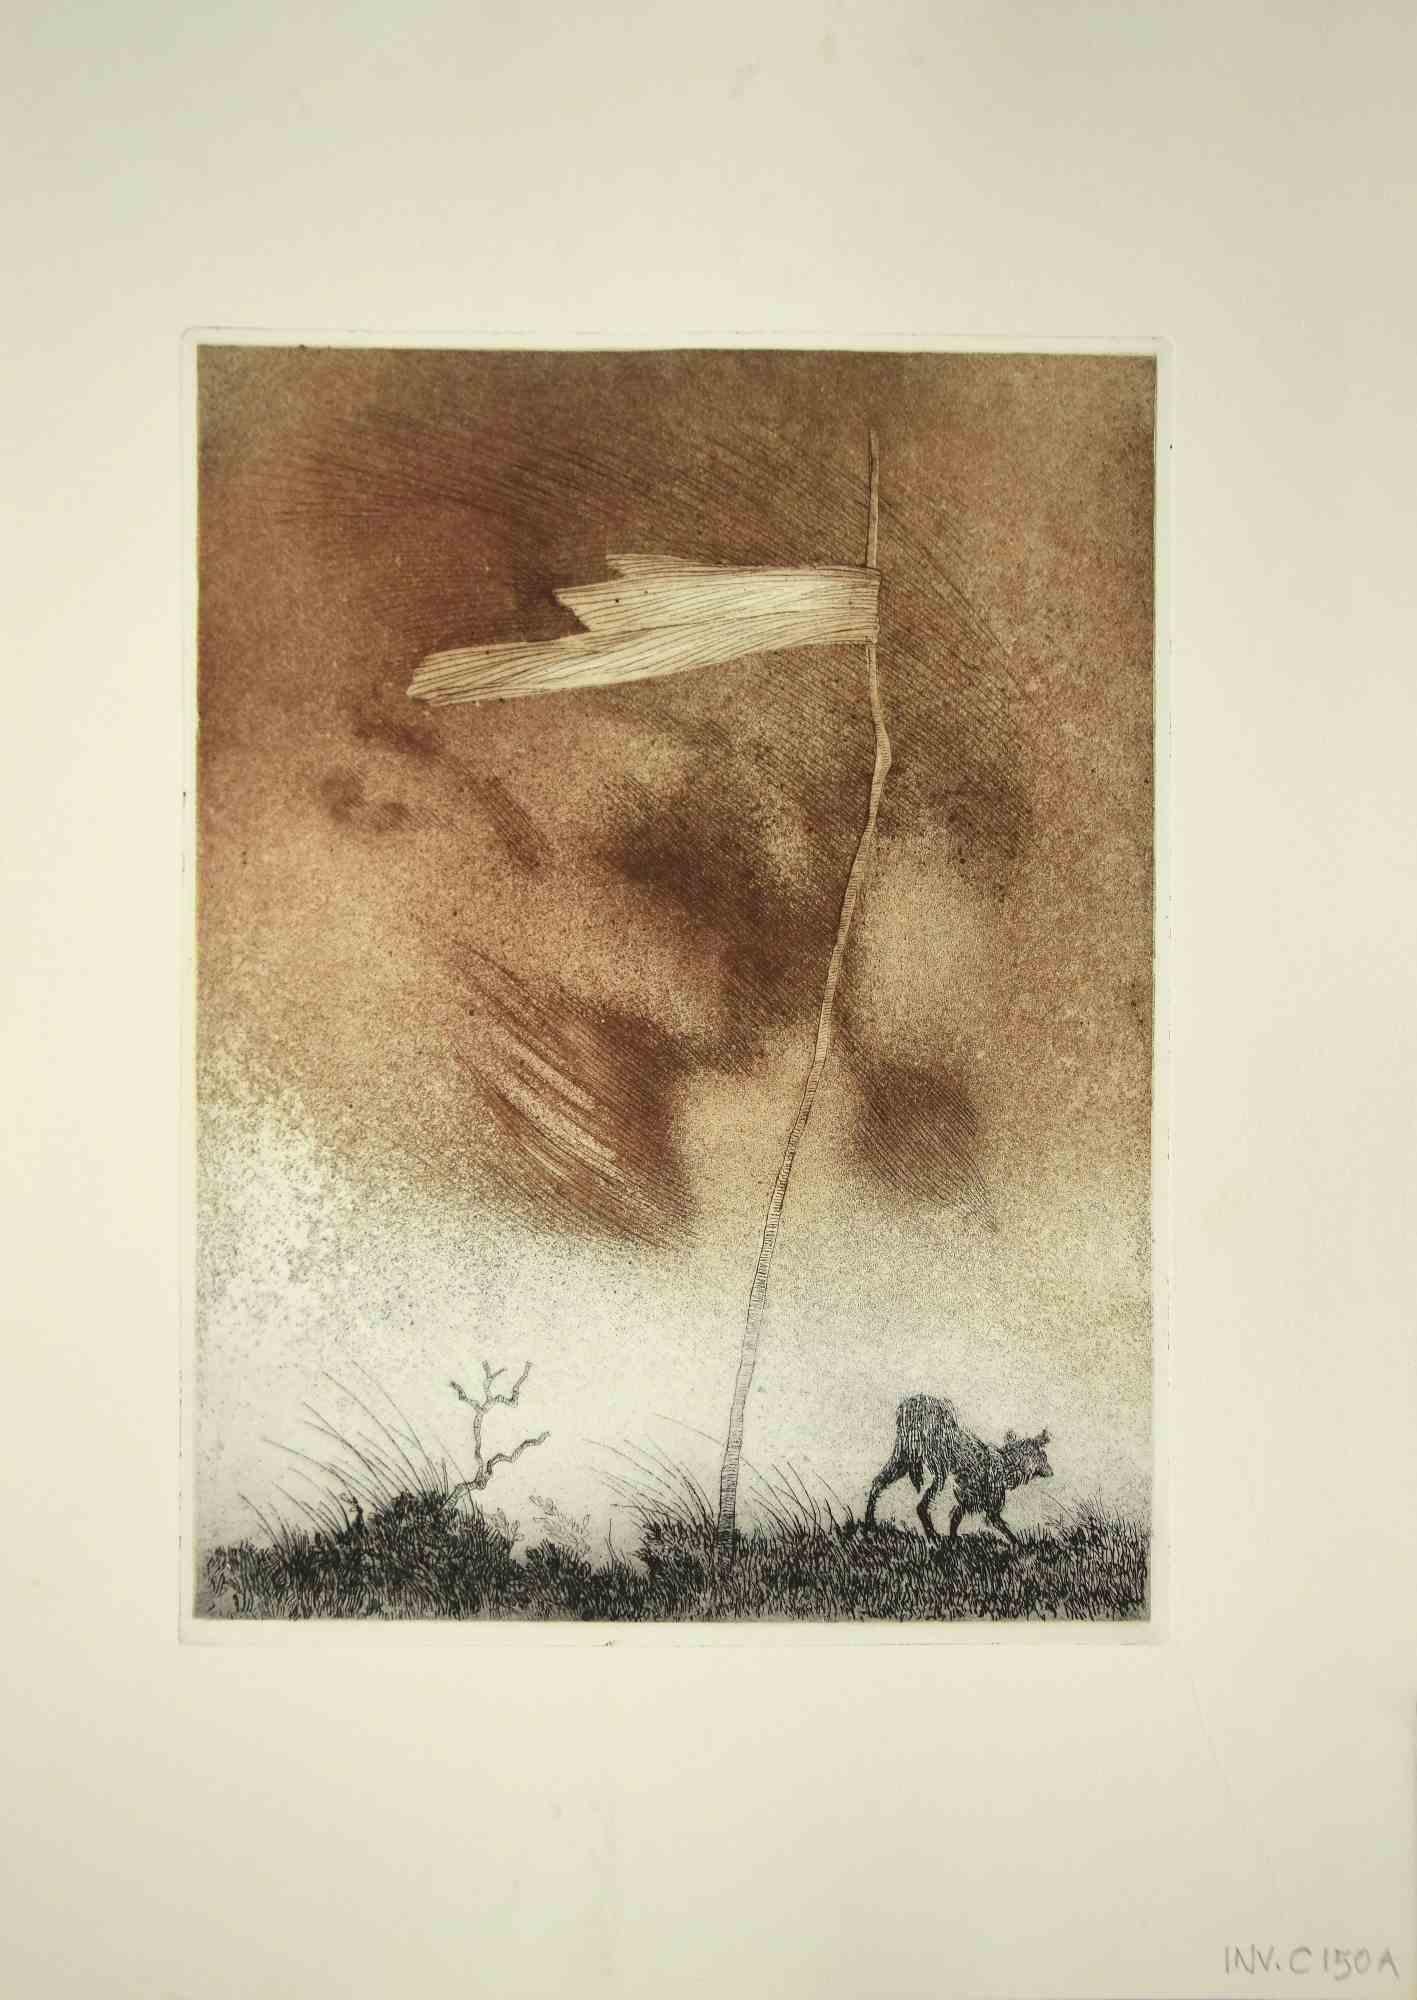 Boundary is an original artwork realized in the 1970s by the Italian Contemporary artist  Leo Guida  (1992 - 2017).

Original etching on ivory-colored paper.

Good conditions.

Leo Guida  (1992 - 2017). Sensitive to current issues, artistic